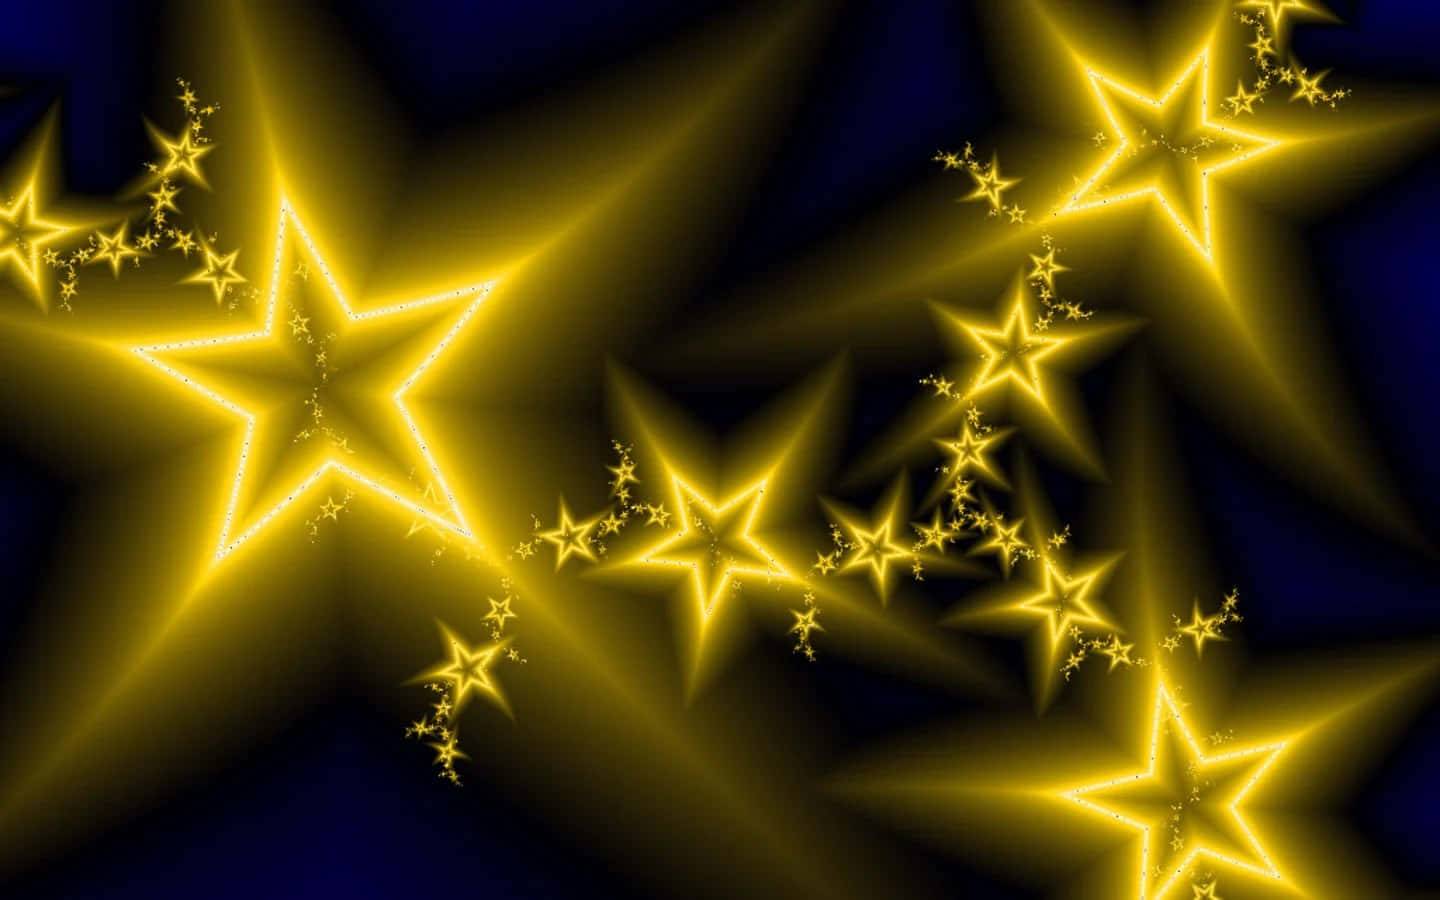 Achieve gold star success in your business or career journey.